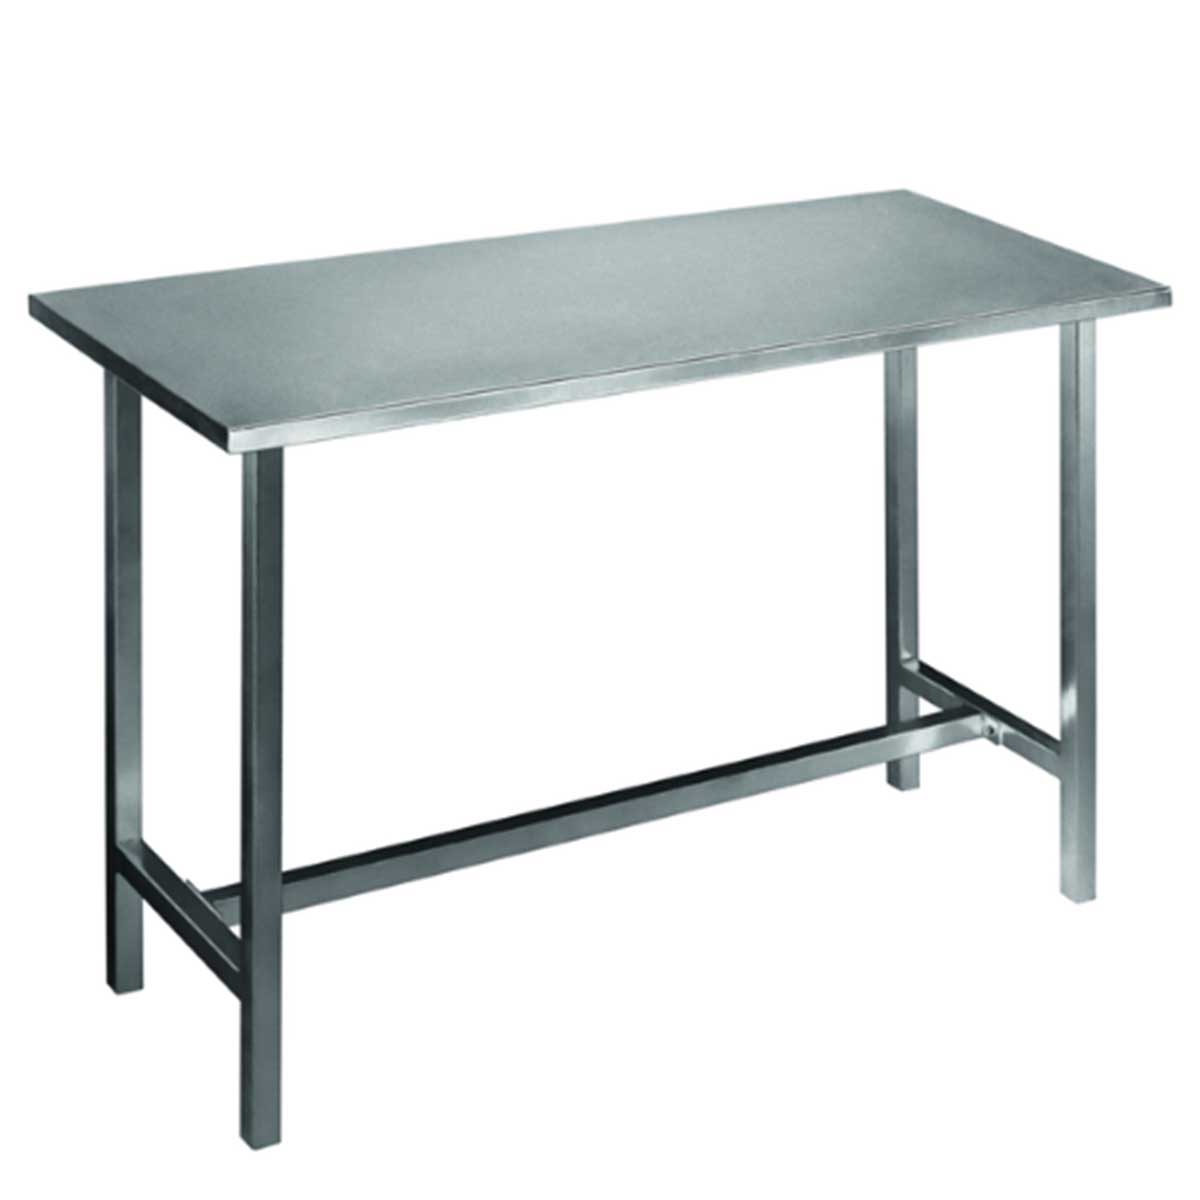 Metal Office Table Manufacturers, Suppliers in Imt Manesar